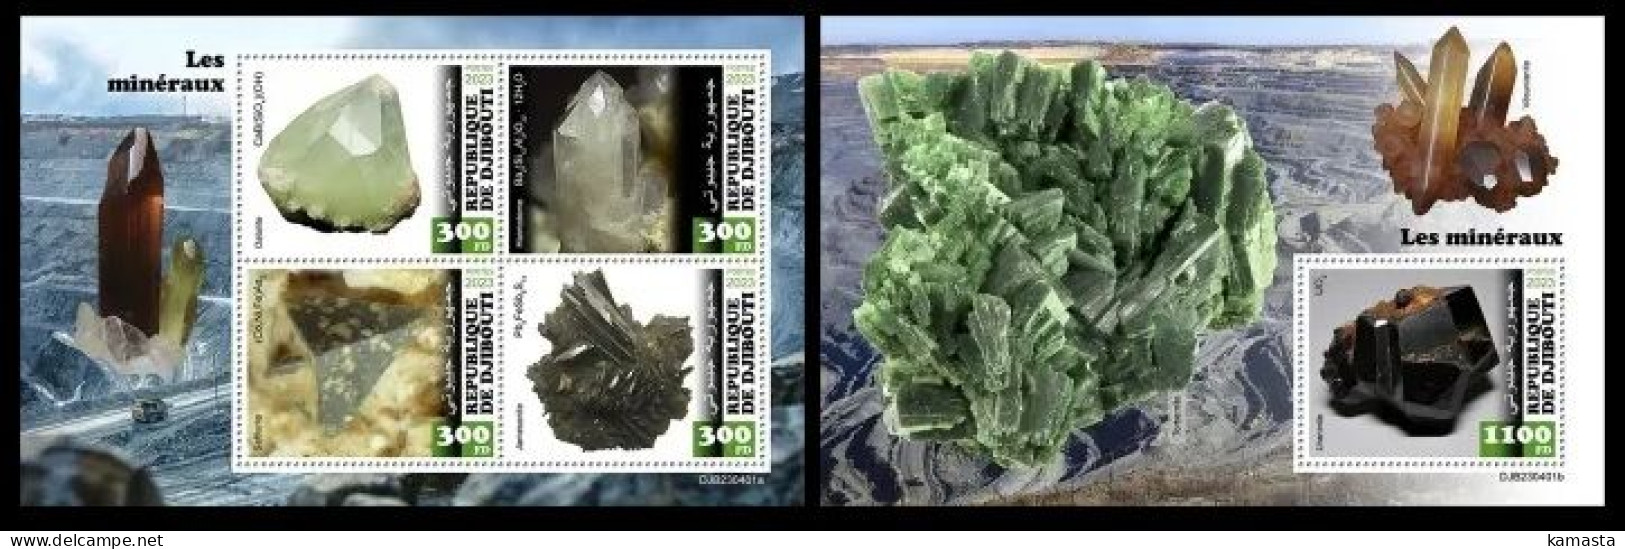 Djibouti 2023 Minerals. (401) OFFICIAL ISSUE - Minerals